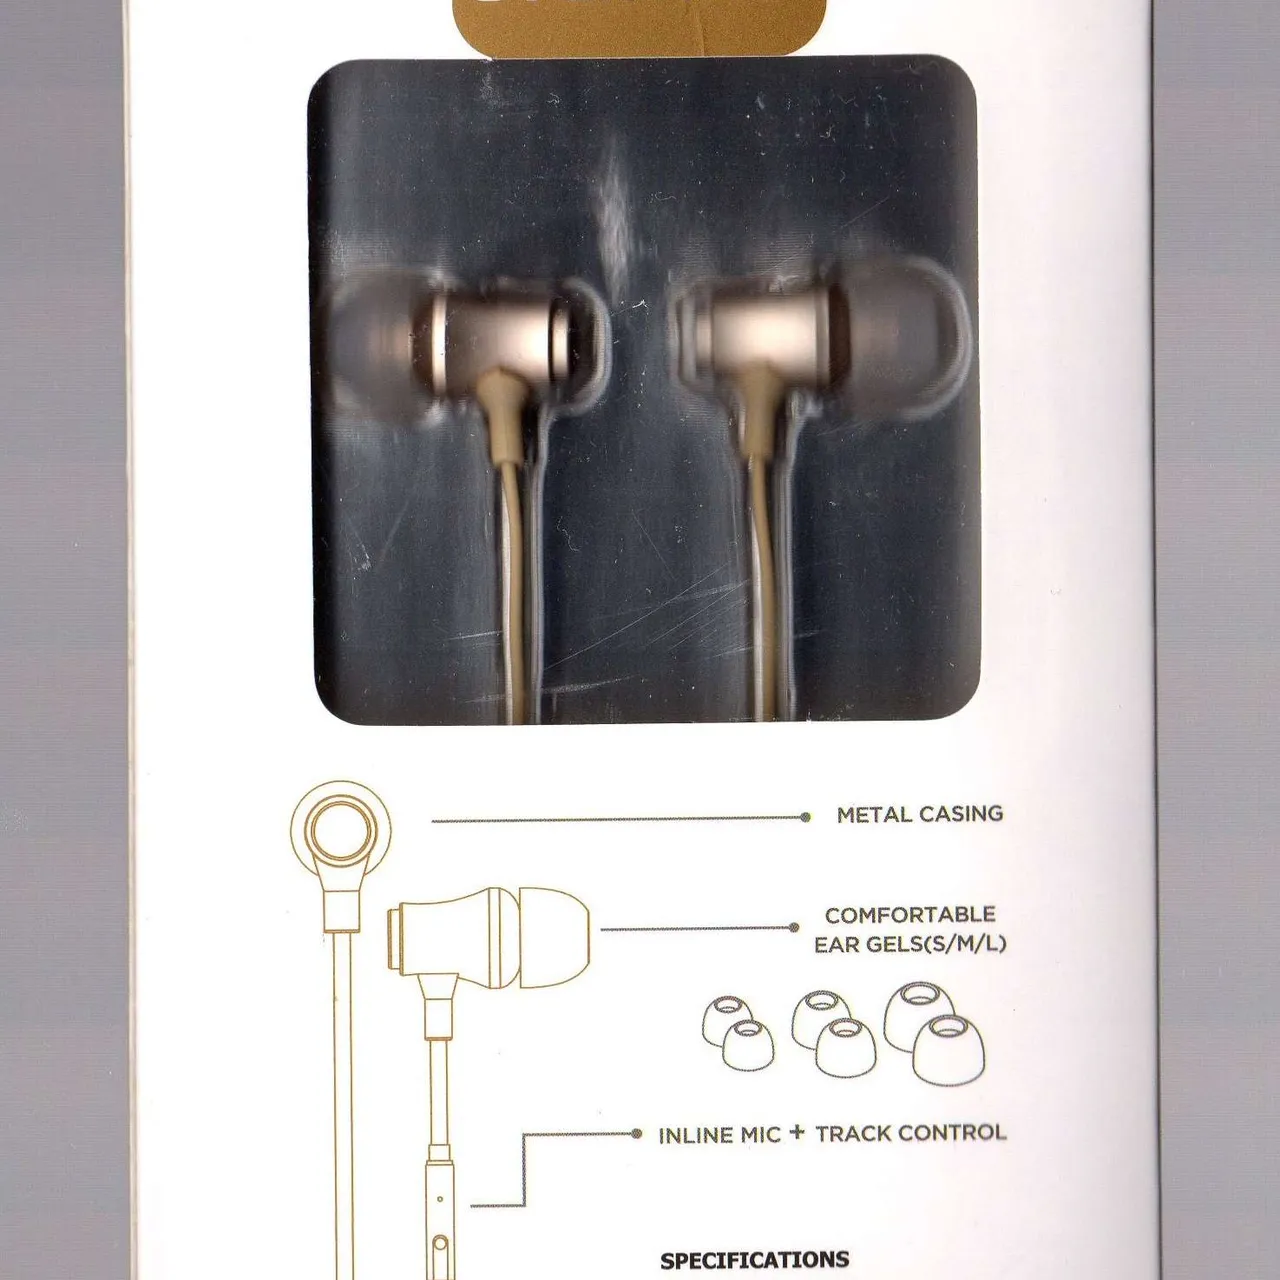 Stereo earbuds photo 3